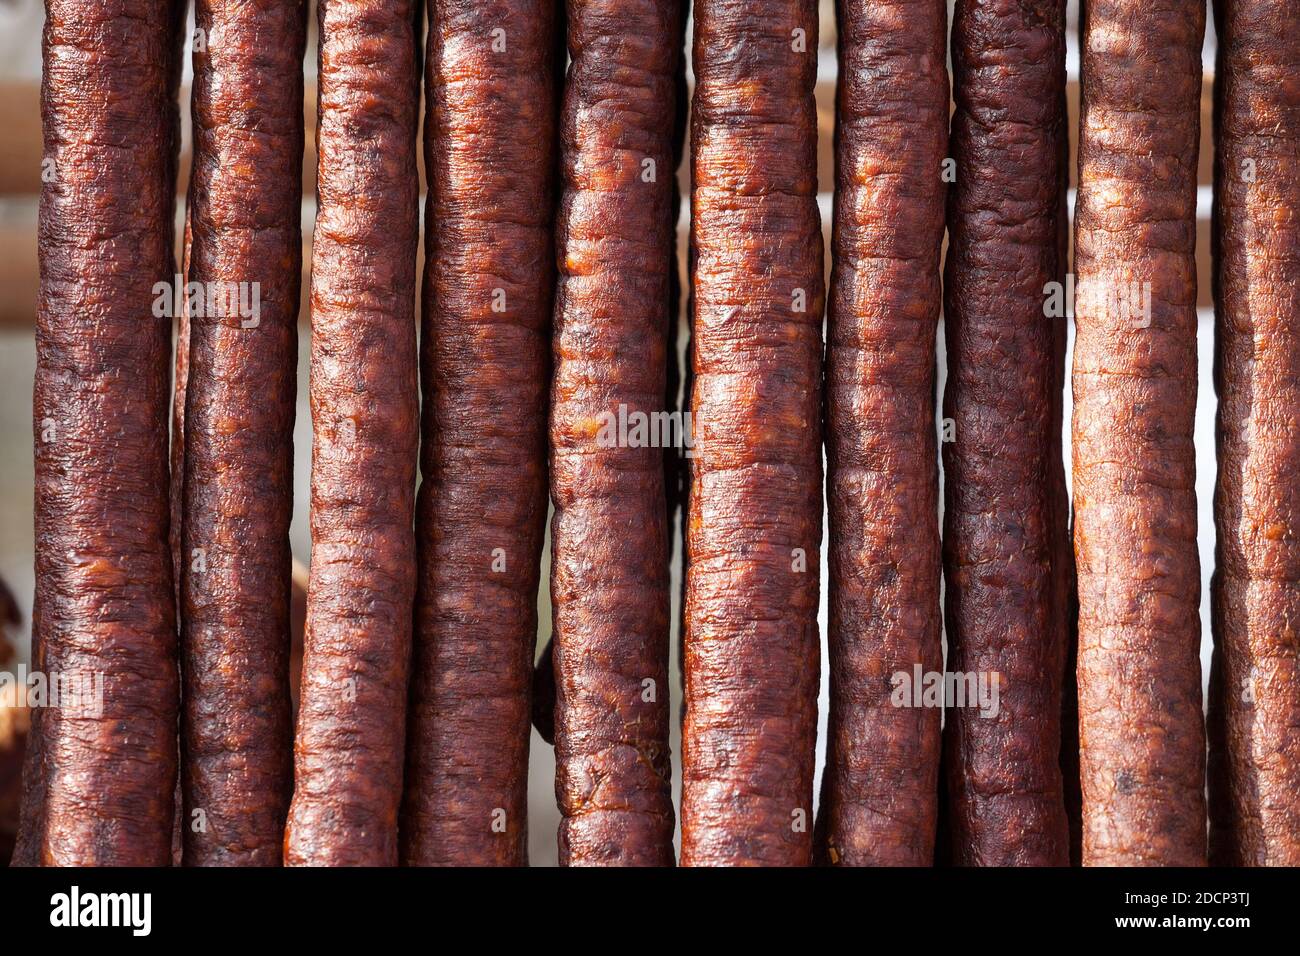 Serbian Kulen Kobasica sausage, handmade, hanging and drying in the coutryside of Serbia. Kulen is a traditional pork sausage, dry and cured, from Cro Stock Photo